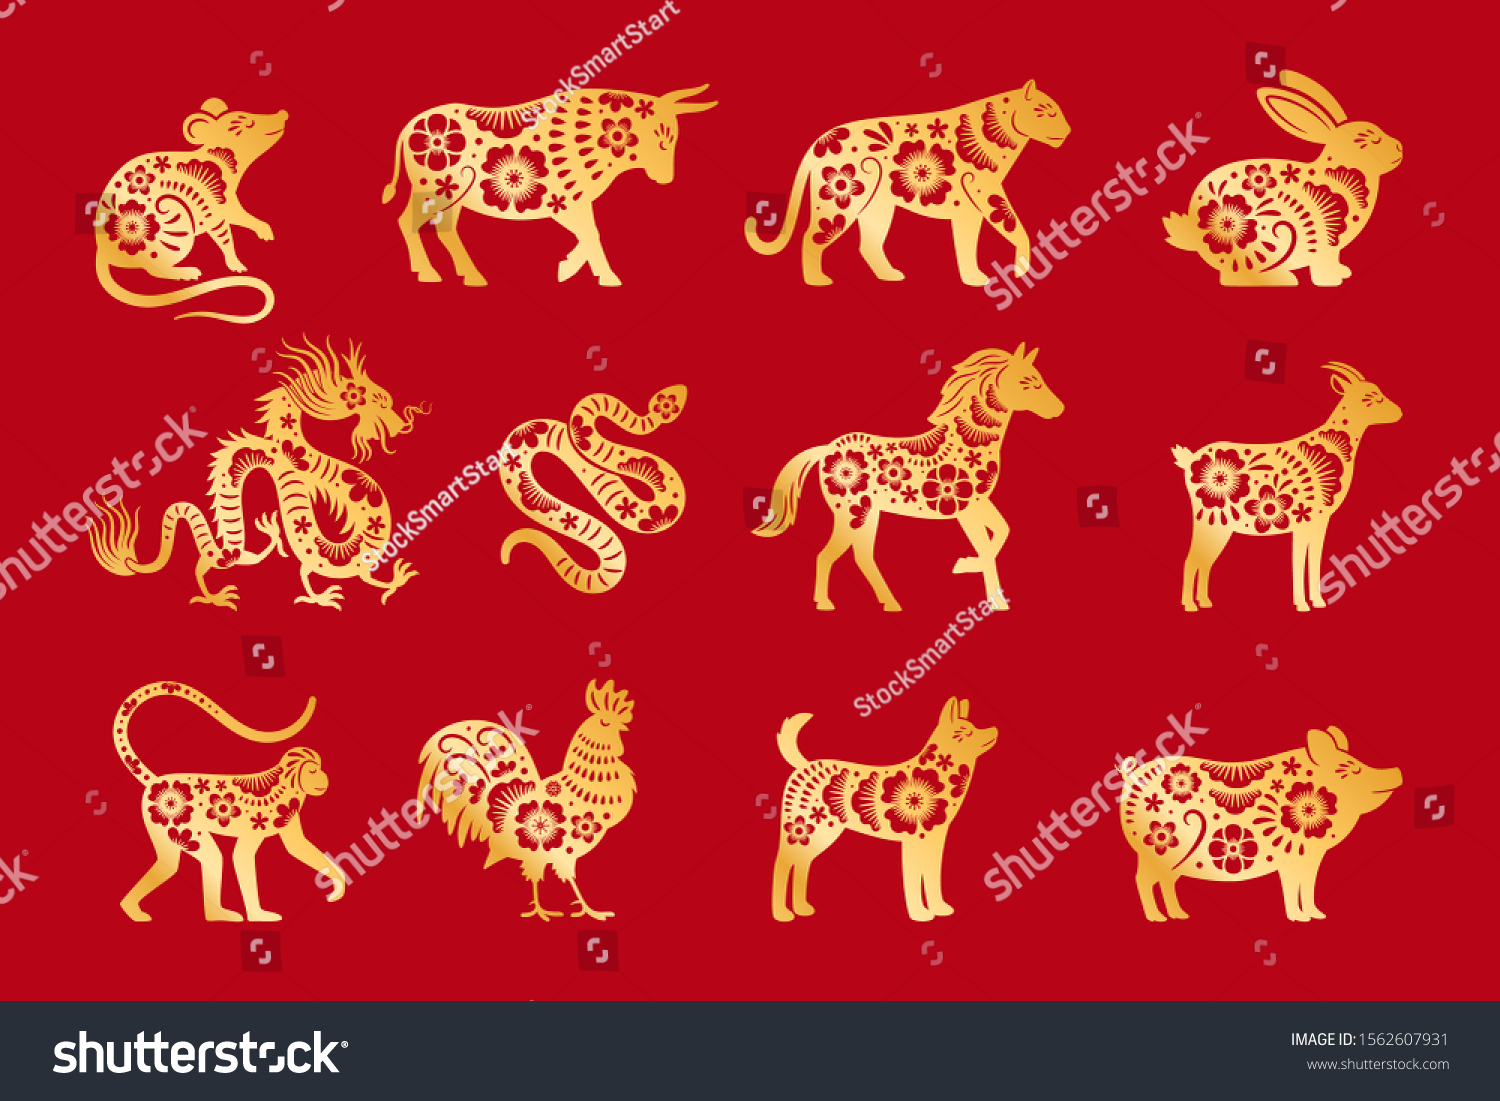 SVG of Gold on red chinese horoscope. Vector chinese animals zodiac, china calandar signs set, astrological oriental zodiacal symbols vector illustration svg